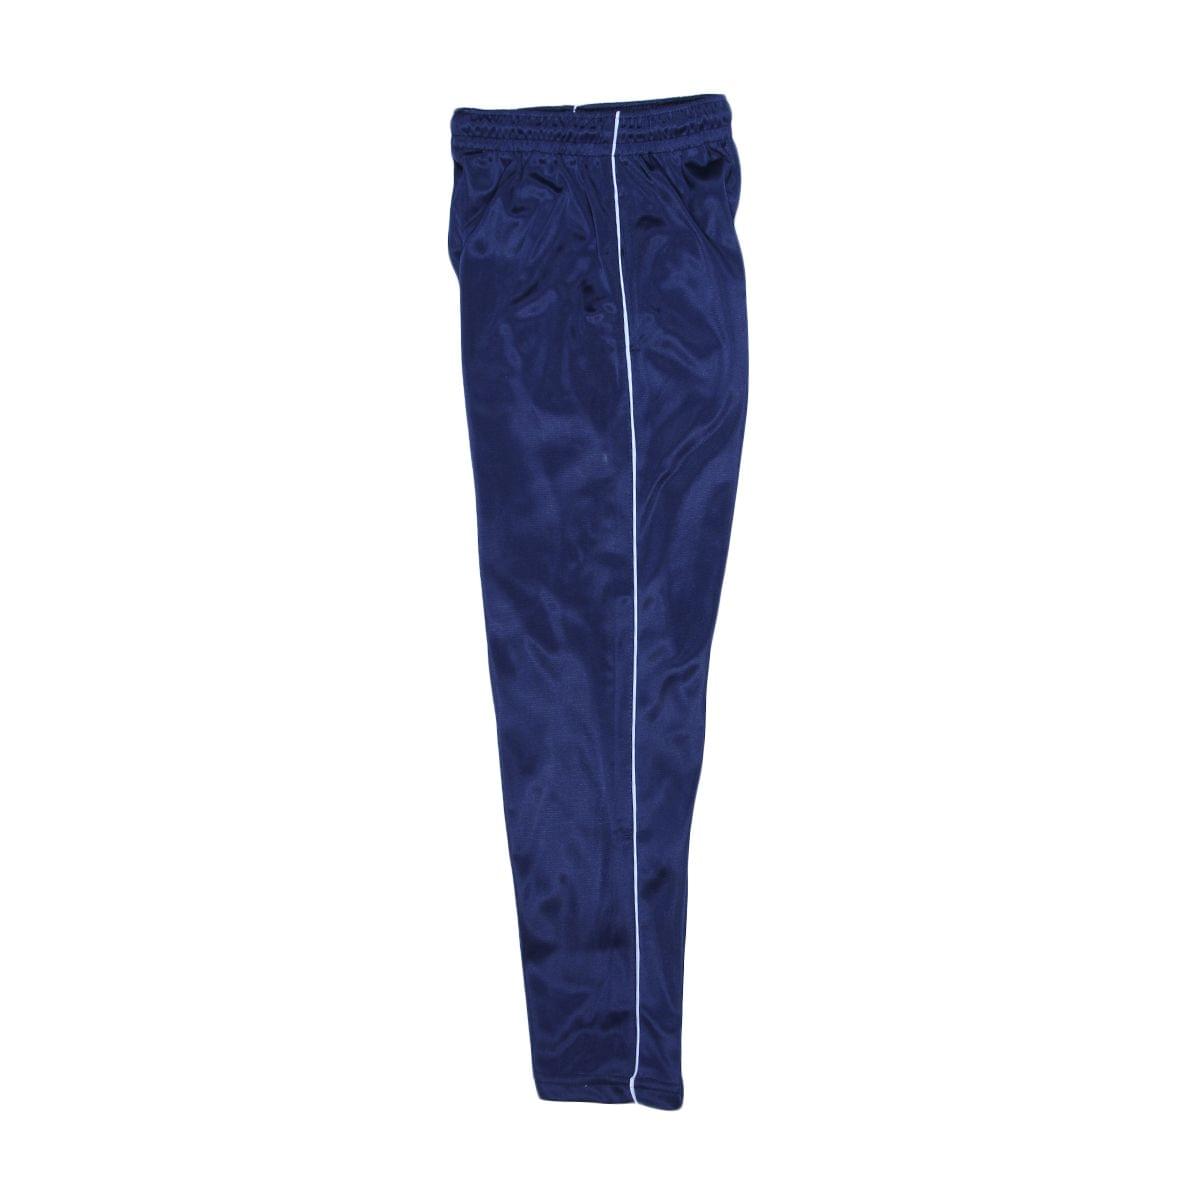 Trackpants: Buy Girls Navy Blue, Golden Cotton Trackpants Online -  Cliths.com